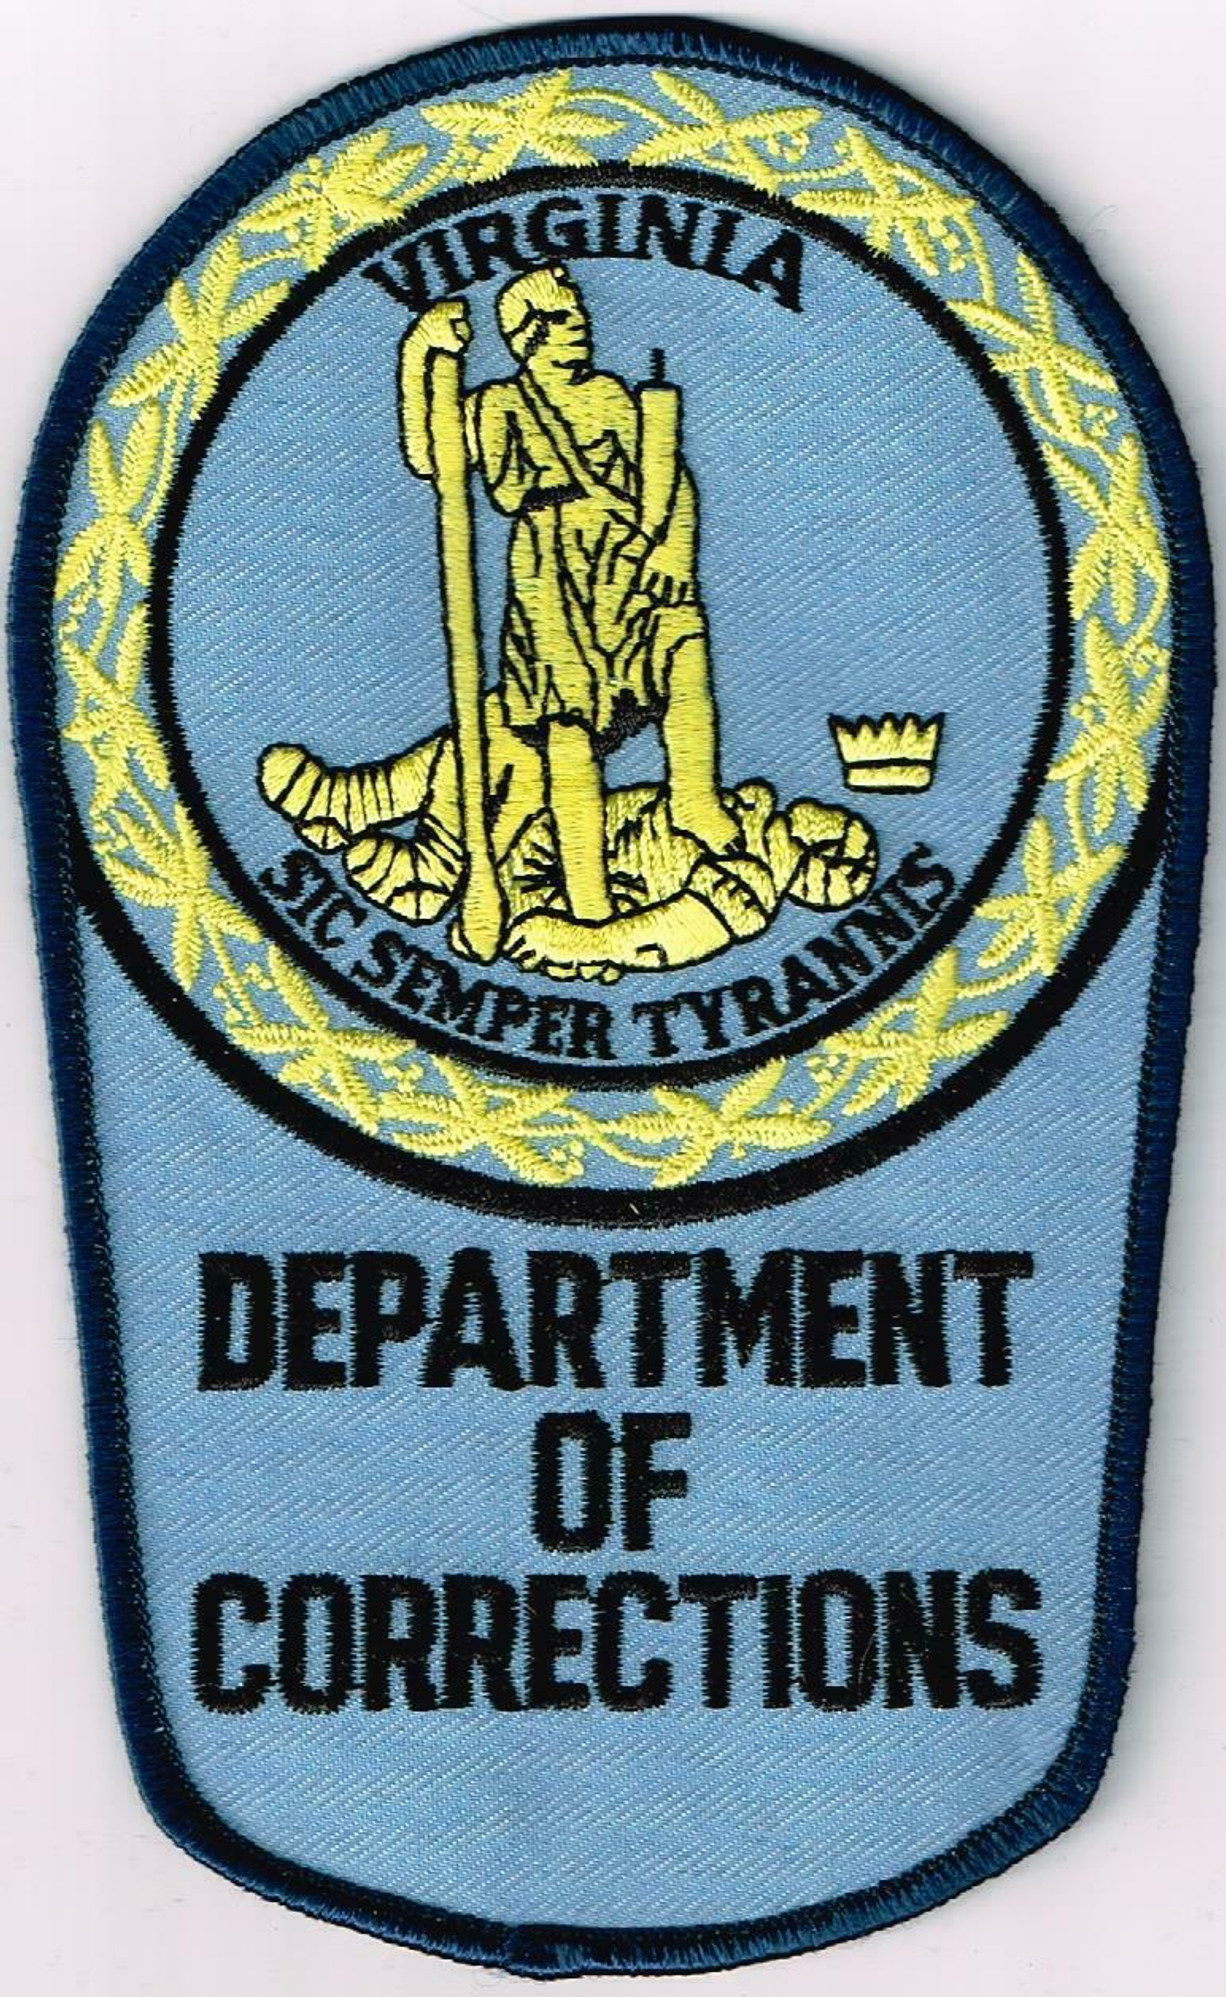 Dept. of Corrections VA Police Patch